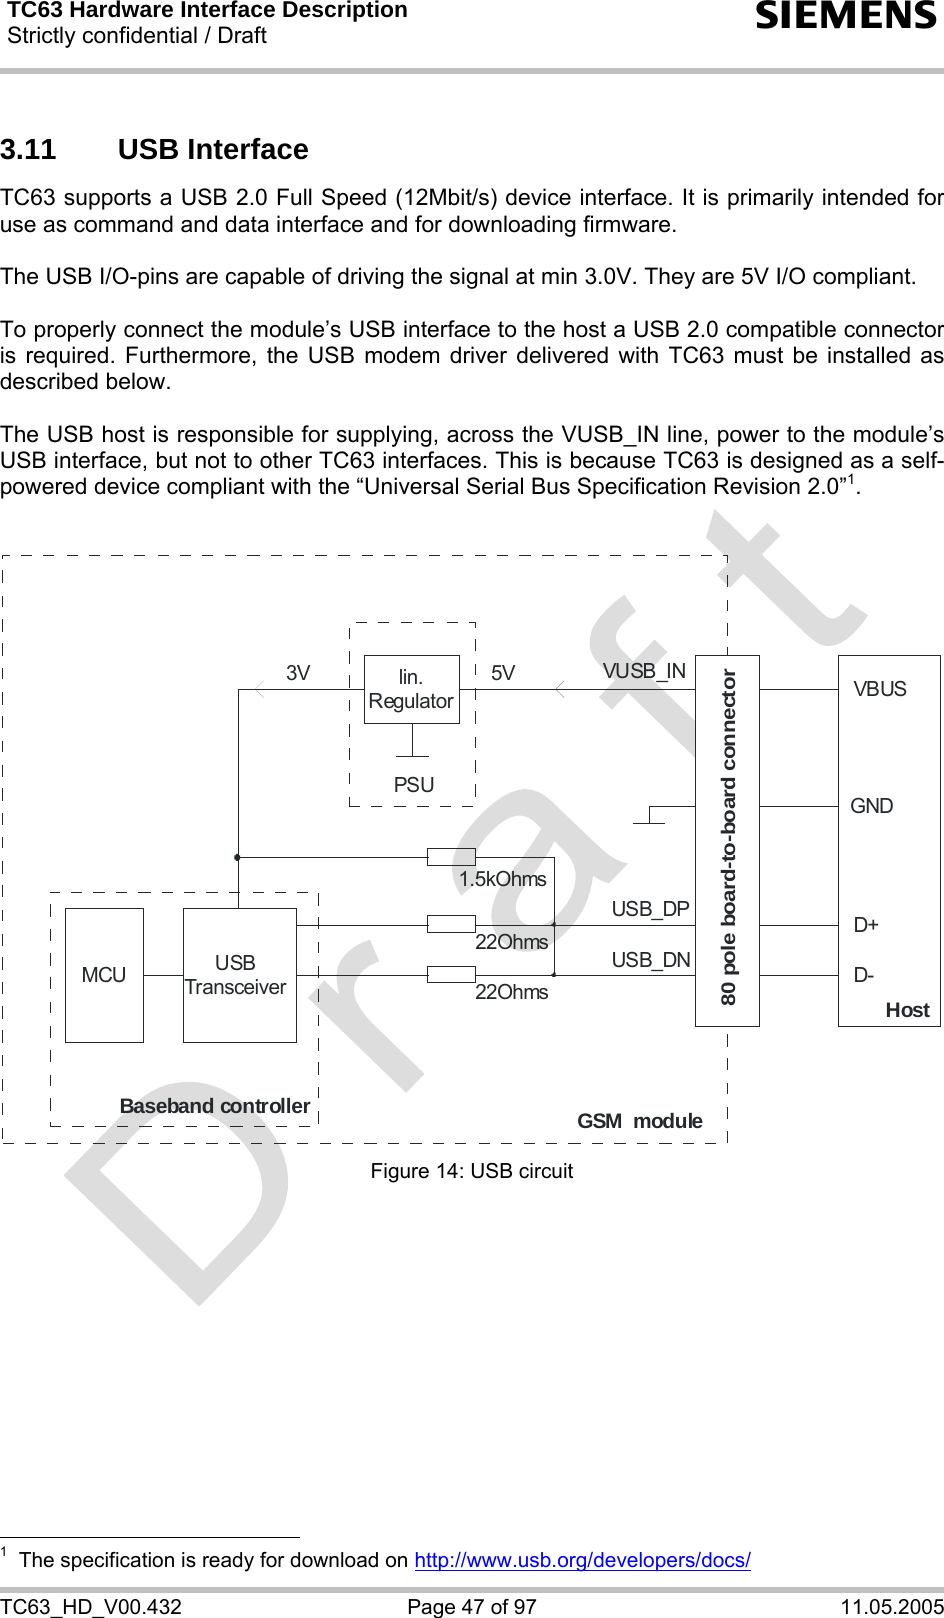 TC63 Hardware Interface Description Strictly confidential / Draft  s TC63_HD_V00.432  Page 47 of 97  11.05.2005 3.11 USB Interface TC63 supports a USB 2.0 Full Speed (12Mbit/s) device interface. It is primarily intended for use as command and data interface and for downloading firmware.  The USB I/O-pins are capable of driving the signal at min 3.0V. They are 5V I/O compliant.  To properly connect the module’s USB interface to the host a USB 2.0 compatible connector is required. Furthermore, the USB modem driver delivered with TC63 must be installed as described below.  The USB host is responsible for supplying, across the VUSB_IN line, power to the module’s USB interface, but not to other TC63 interfaces. This is because TC63 is designed as a self-powered device compliant with the “Universal Serial Bus Specification Revision 2.0”1.   MCUUSBTransceiverlin.RegulatorPSUBaseband controllerGSM  moduleHost22Ohms22Ohms1.5kOhmsUSB_DPUSB_DNVUSB_IN5V3VD+D-VBUSGND80 pole board-to-board connector Figure 14: USB circuit                                                    1  The specification is ready for download on http://www.usb.org/developers/docs/ 